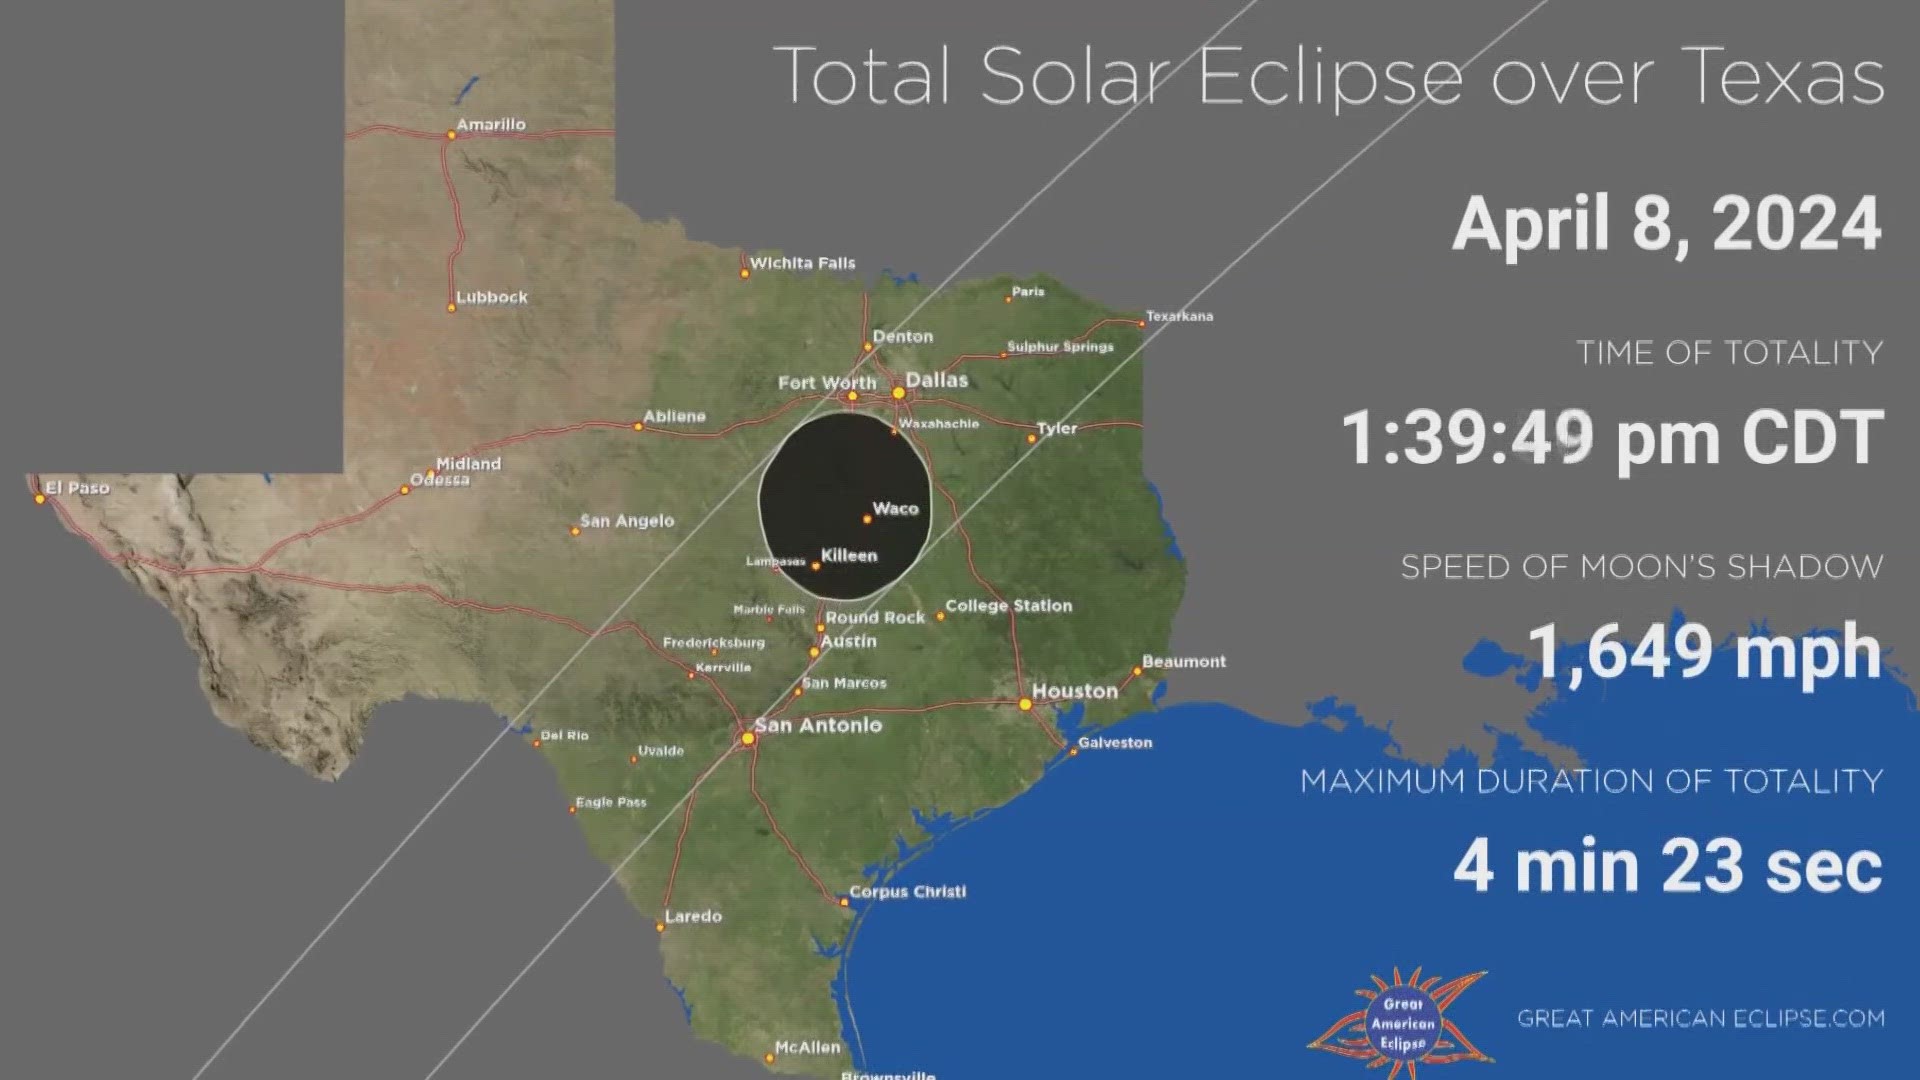 On April 8th, 2024, the city of Killeen will experience complete totality for 4 minutes and 16 seconds at 1:36 pm. Here's what the city is doing to prepare.